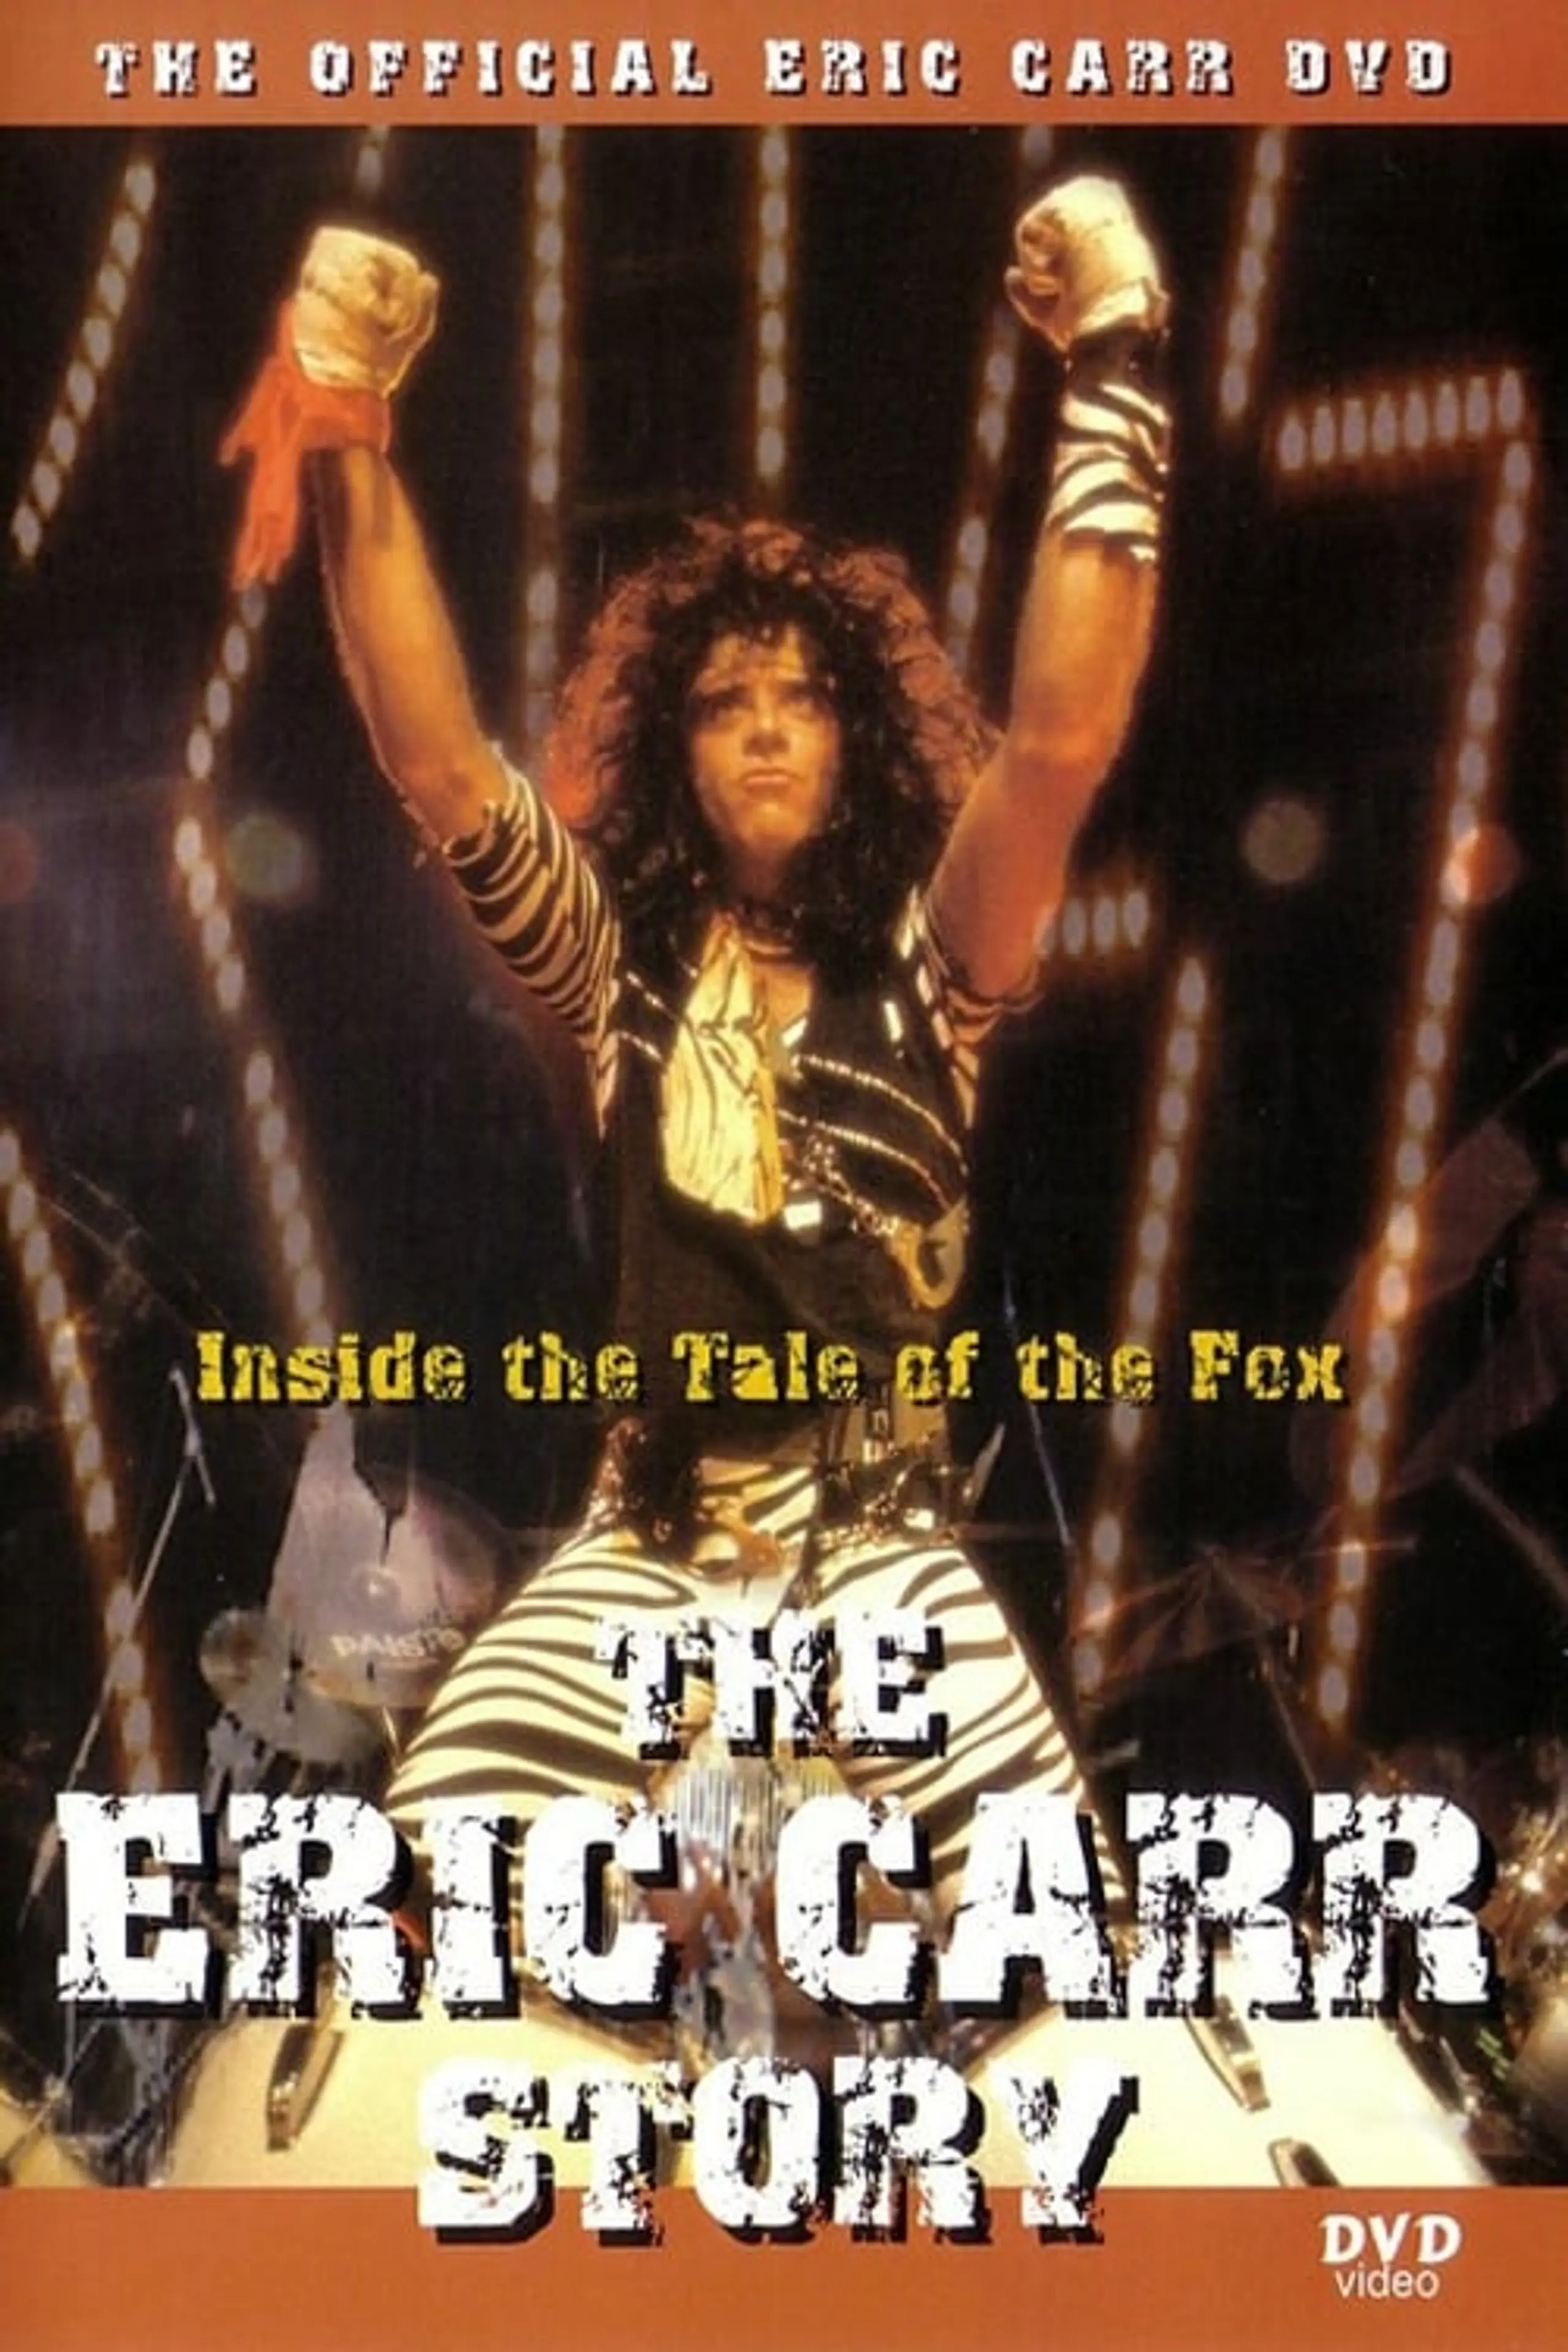 Tail of the Fox: Eric Carr